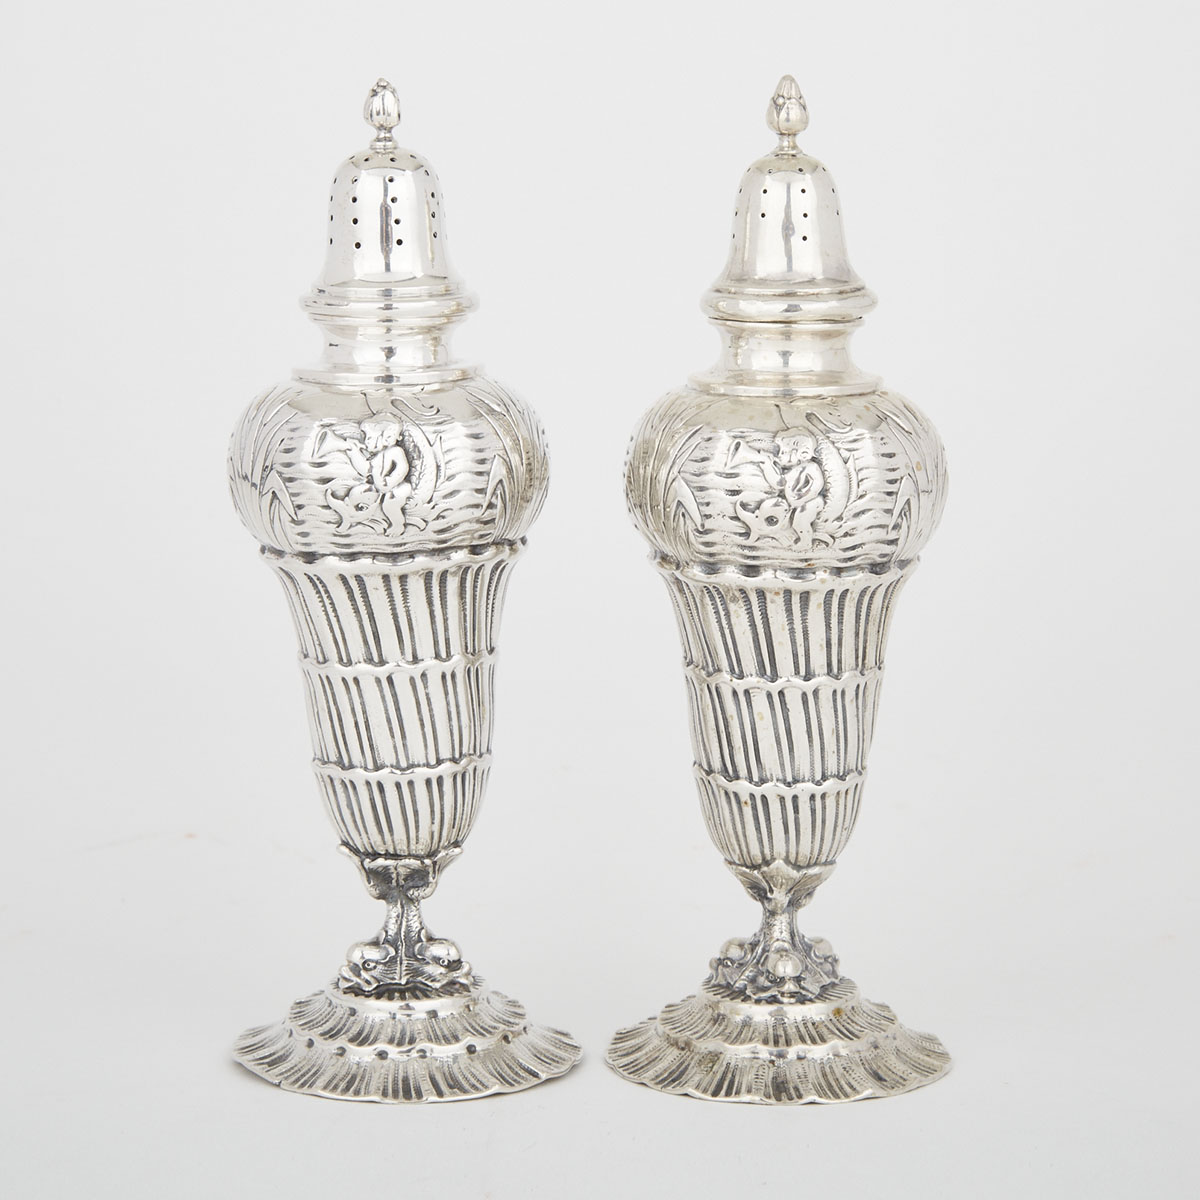 Pair of German Silver Casters, probably Hanau, late 19th century